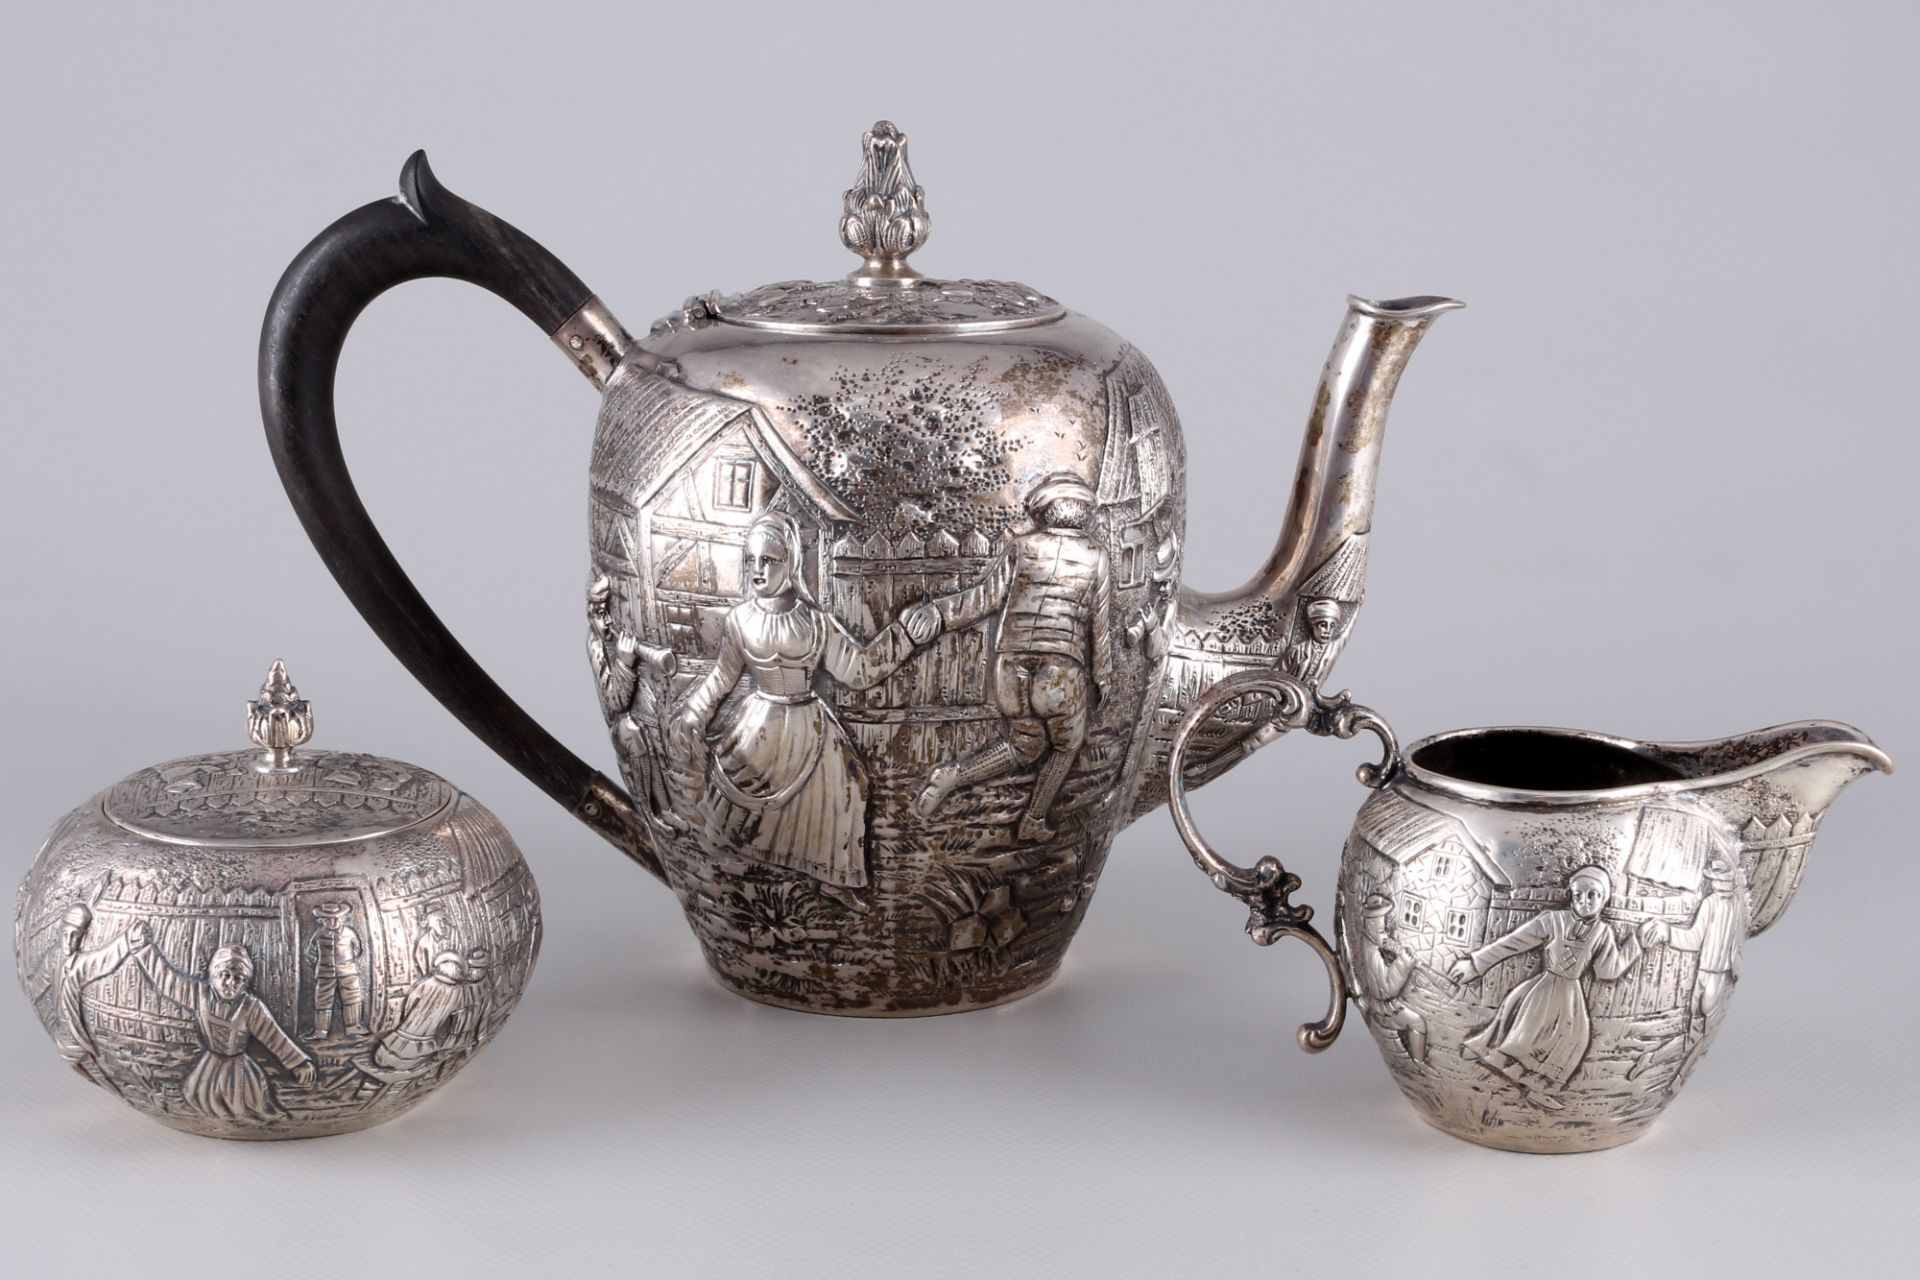 Ludwig Neresheimer 800 silver coffee set with dancing scenery, Silber Kaffeekern mit Tanzszenerie, - Image 4 of 5